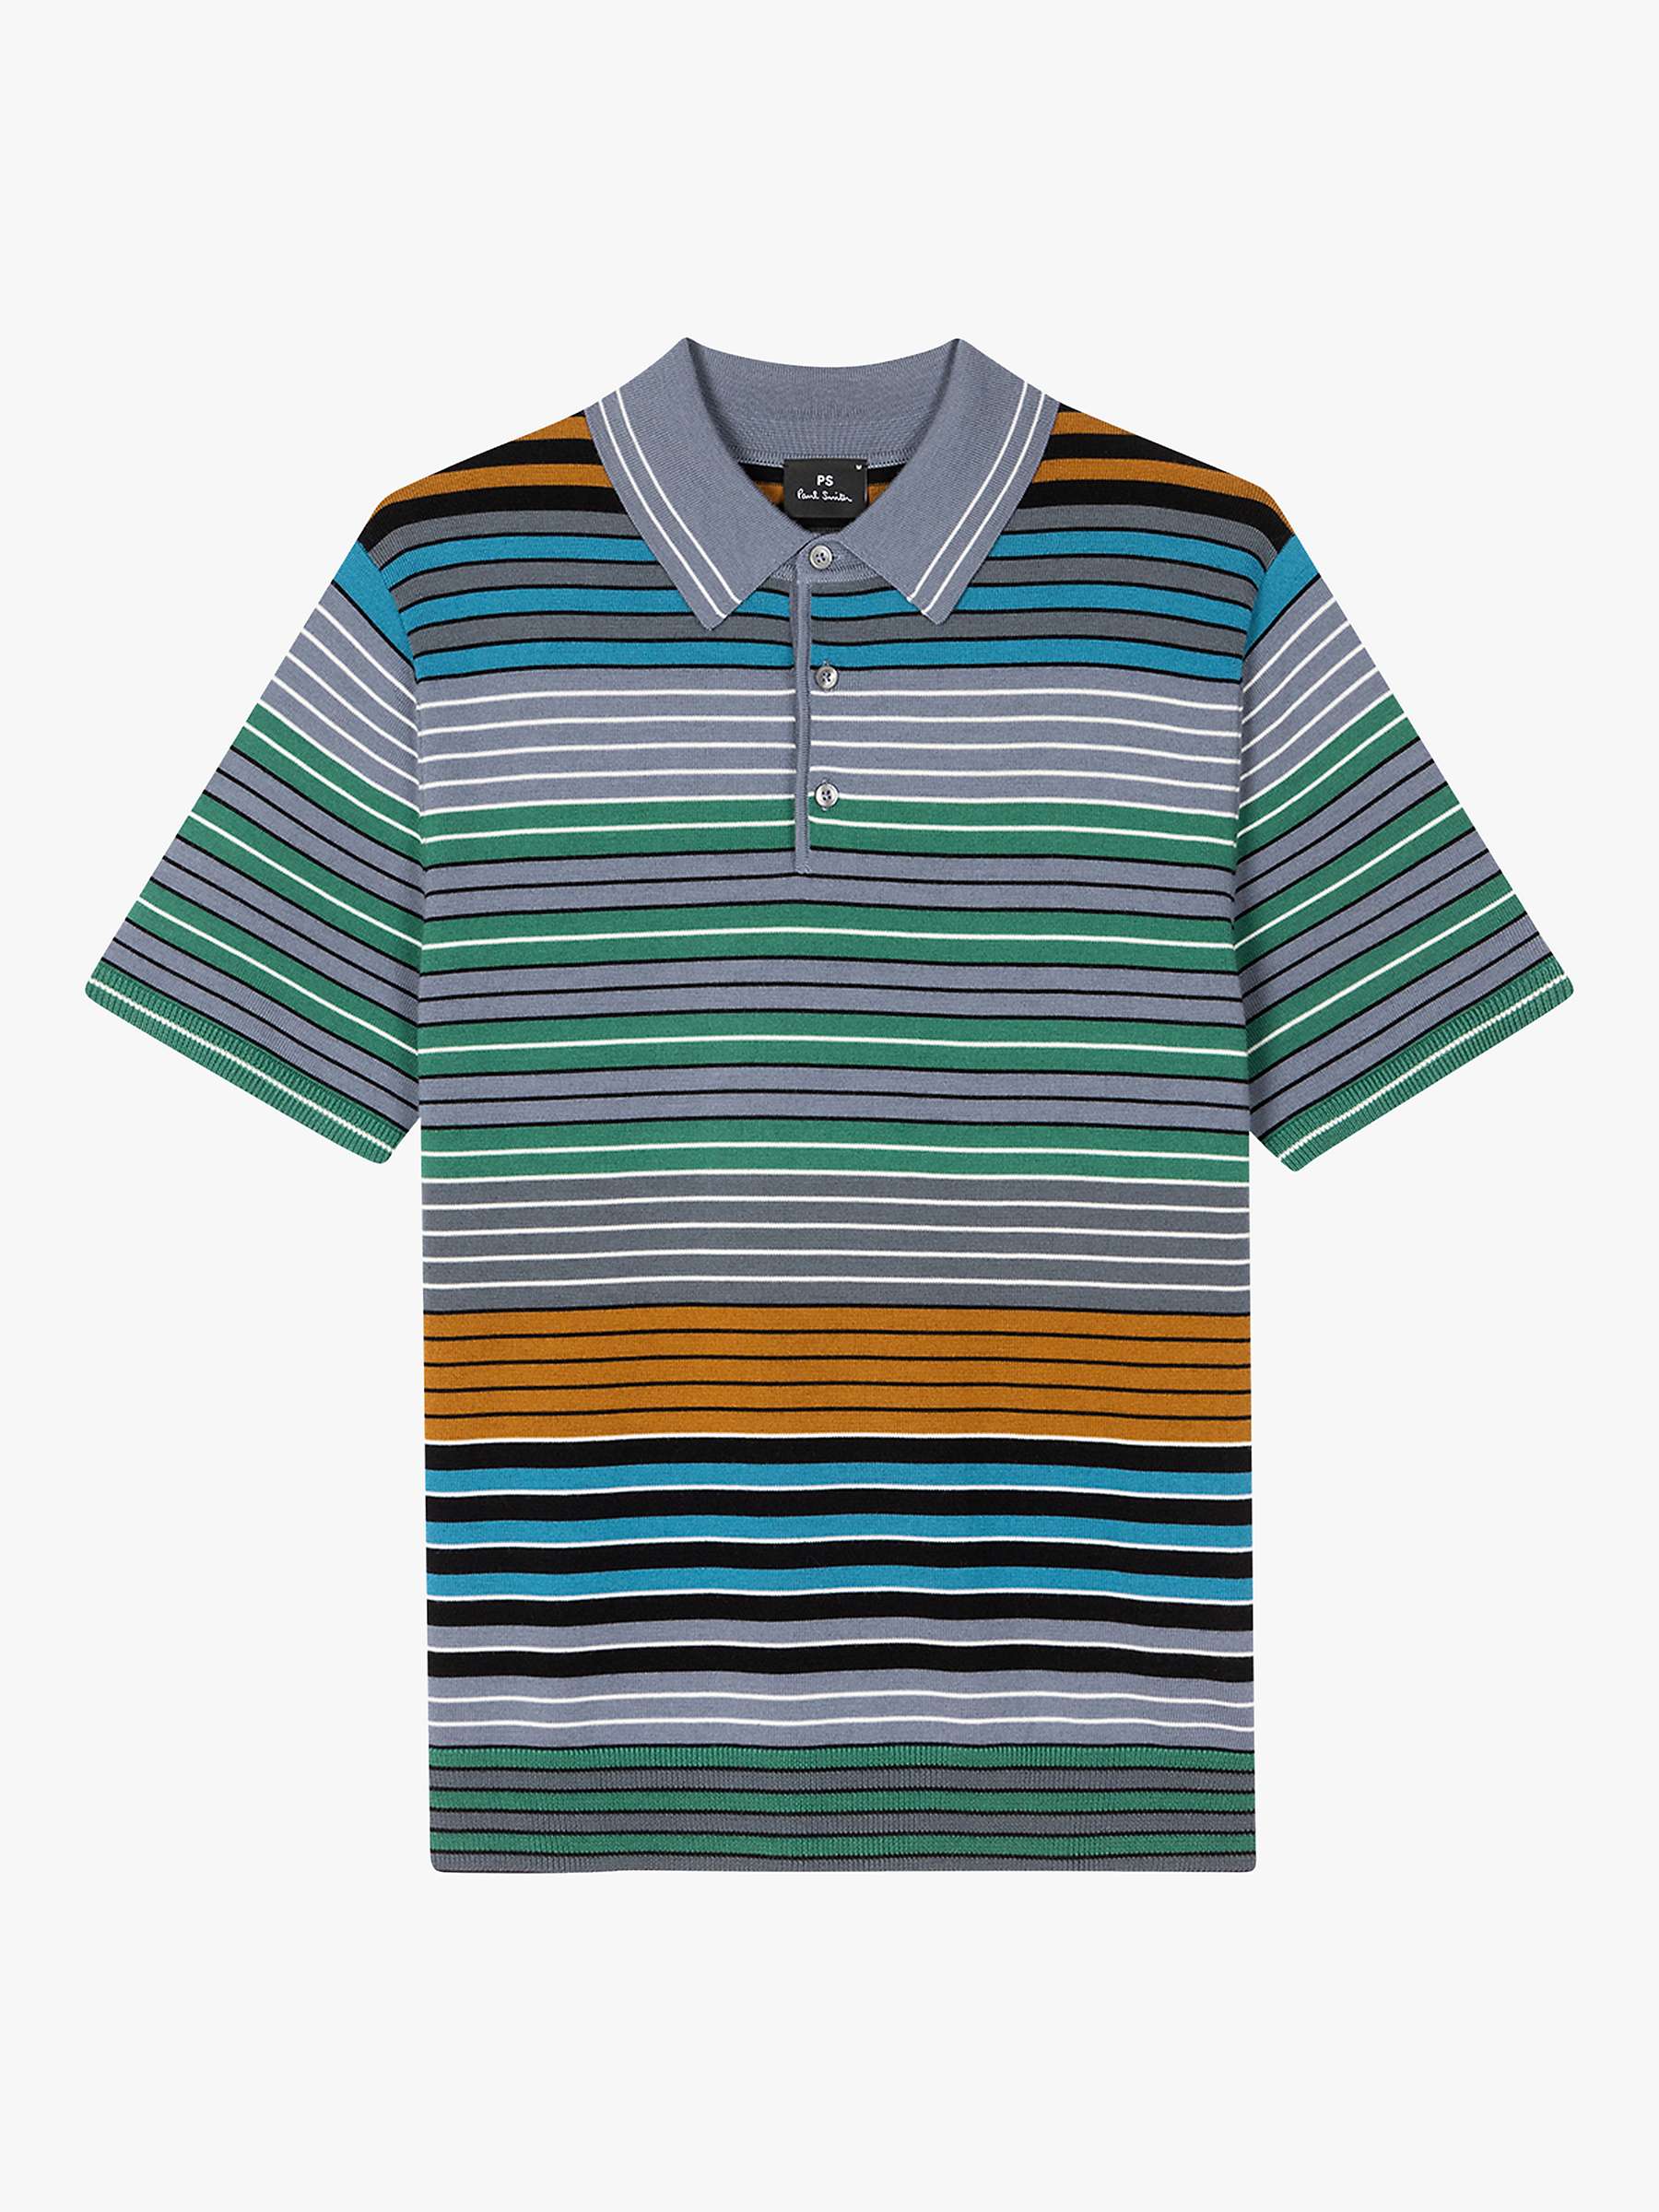 Buy PS Paul Smith Short Sleeve All-Over Stripe Polo Shirt, Grey/Multi Online at johnlewis.com